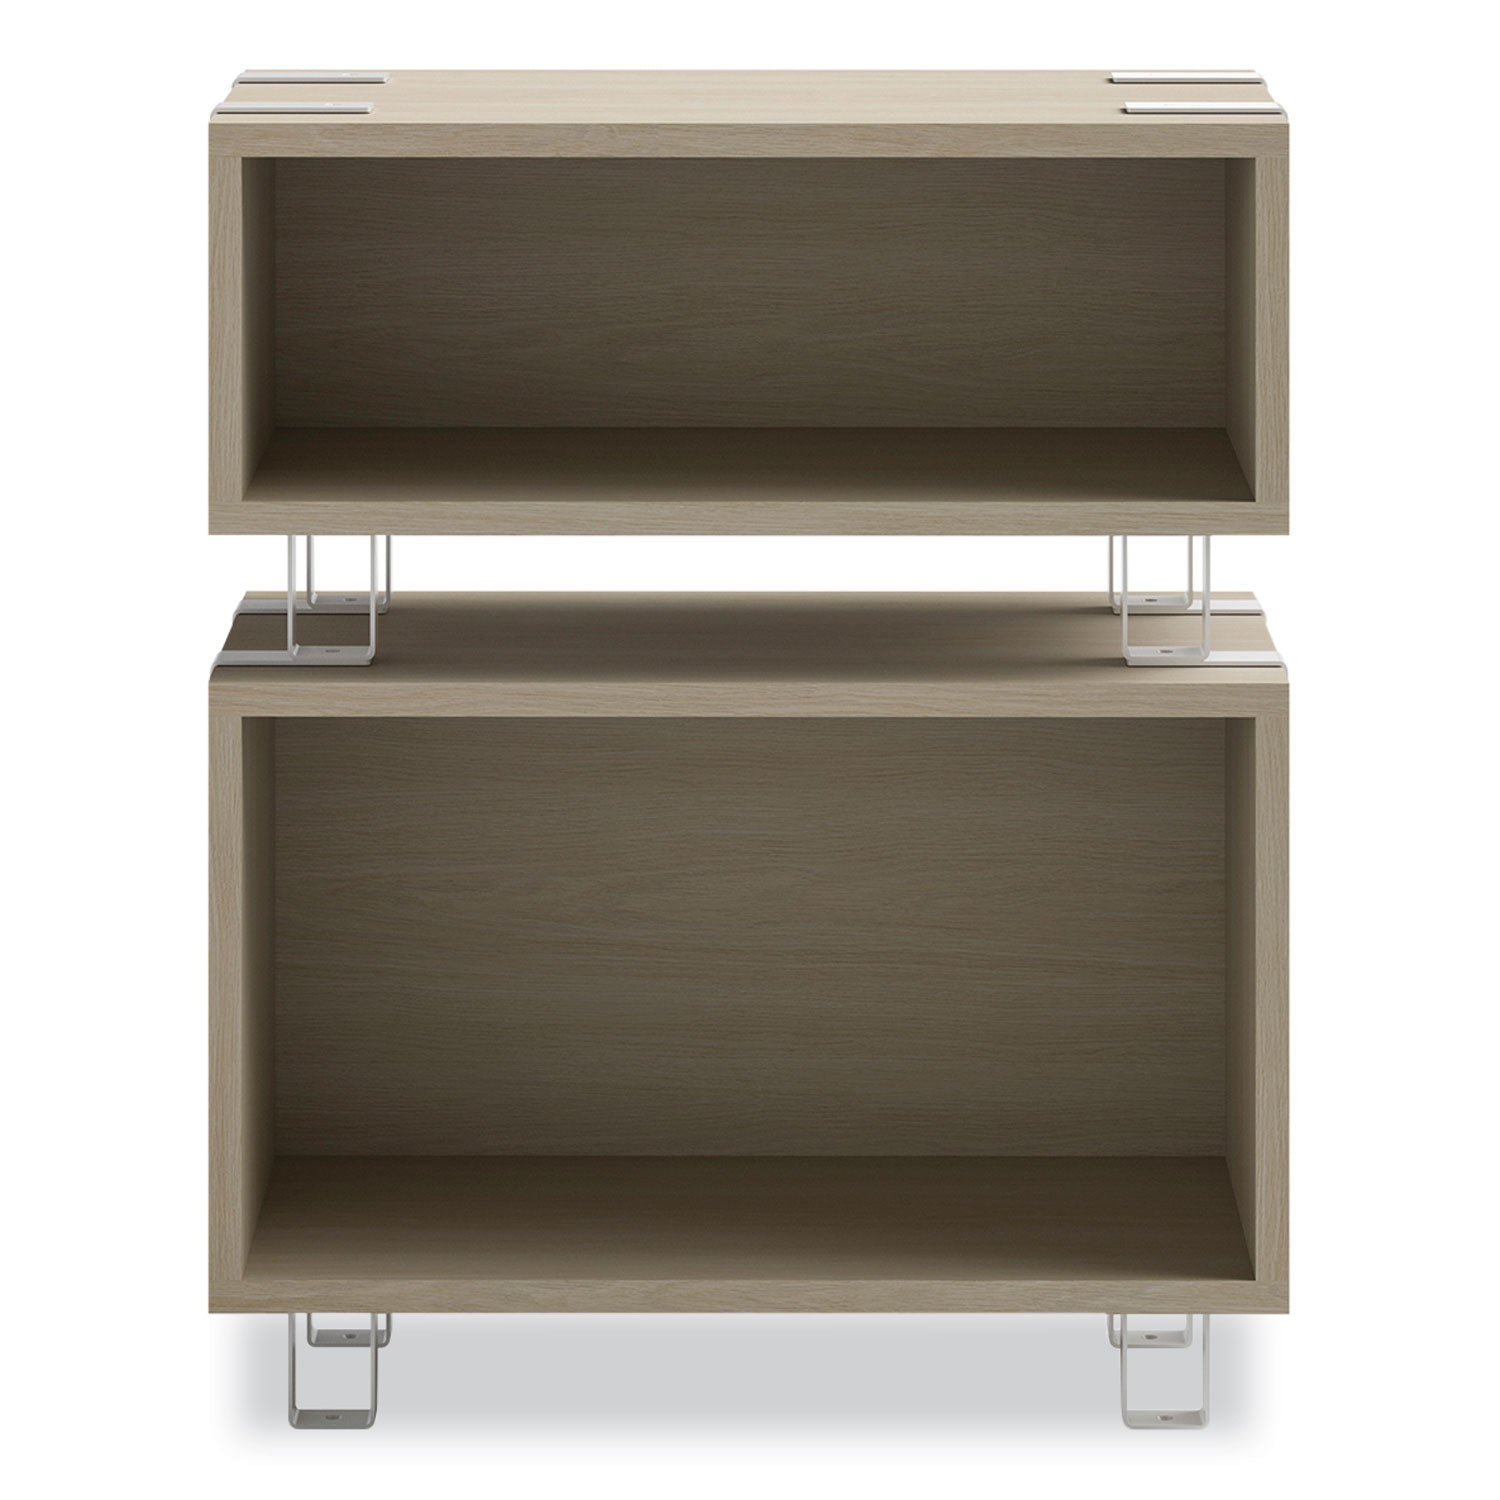 ready-home-office-large-stackable-storage-1-shelf-24w-x-12d-x-1725h-beige-white-ships-in-1-3-business-days_saf5509whna - 8